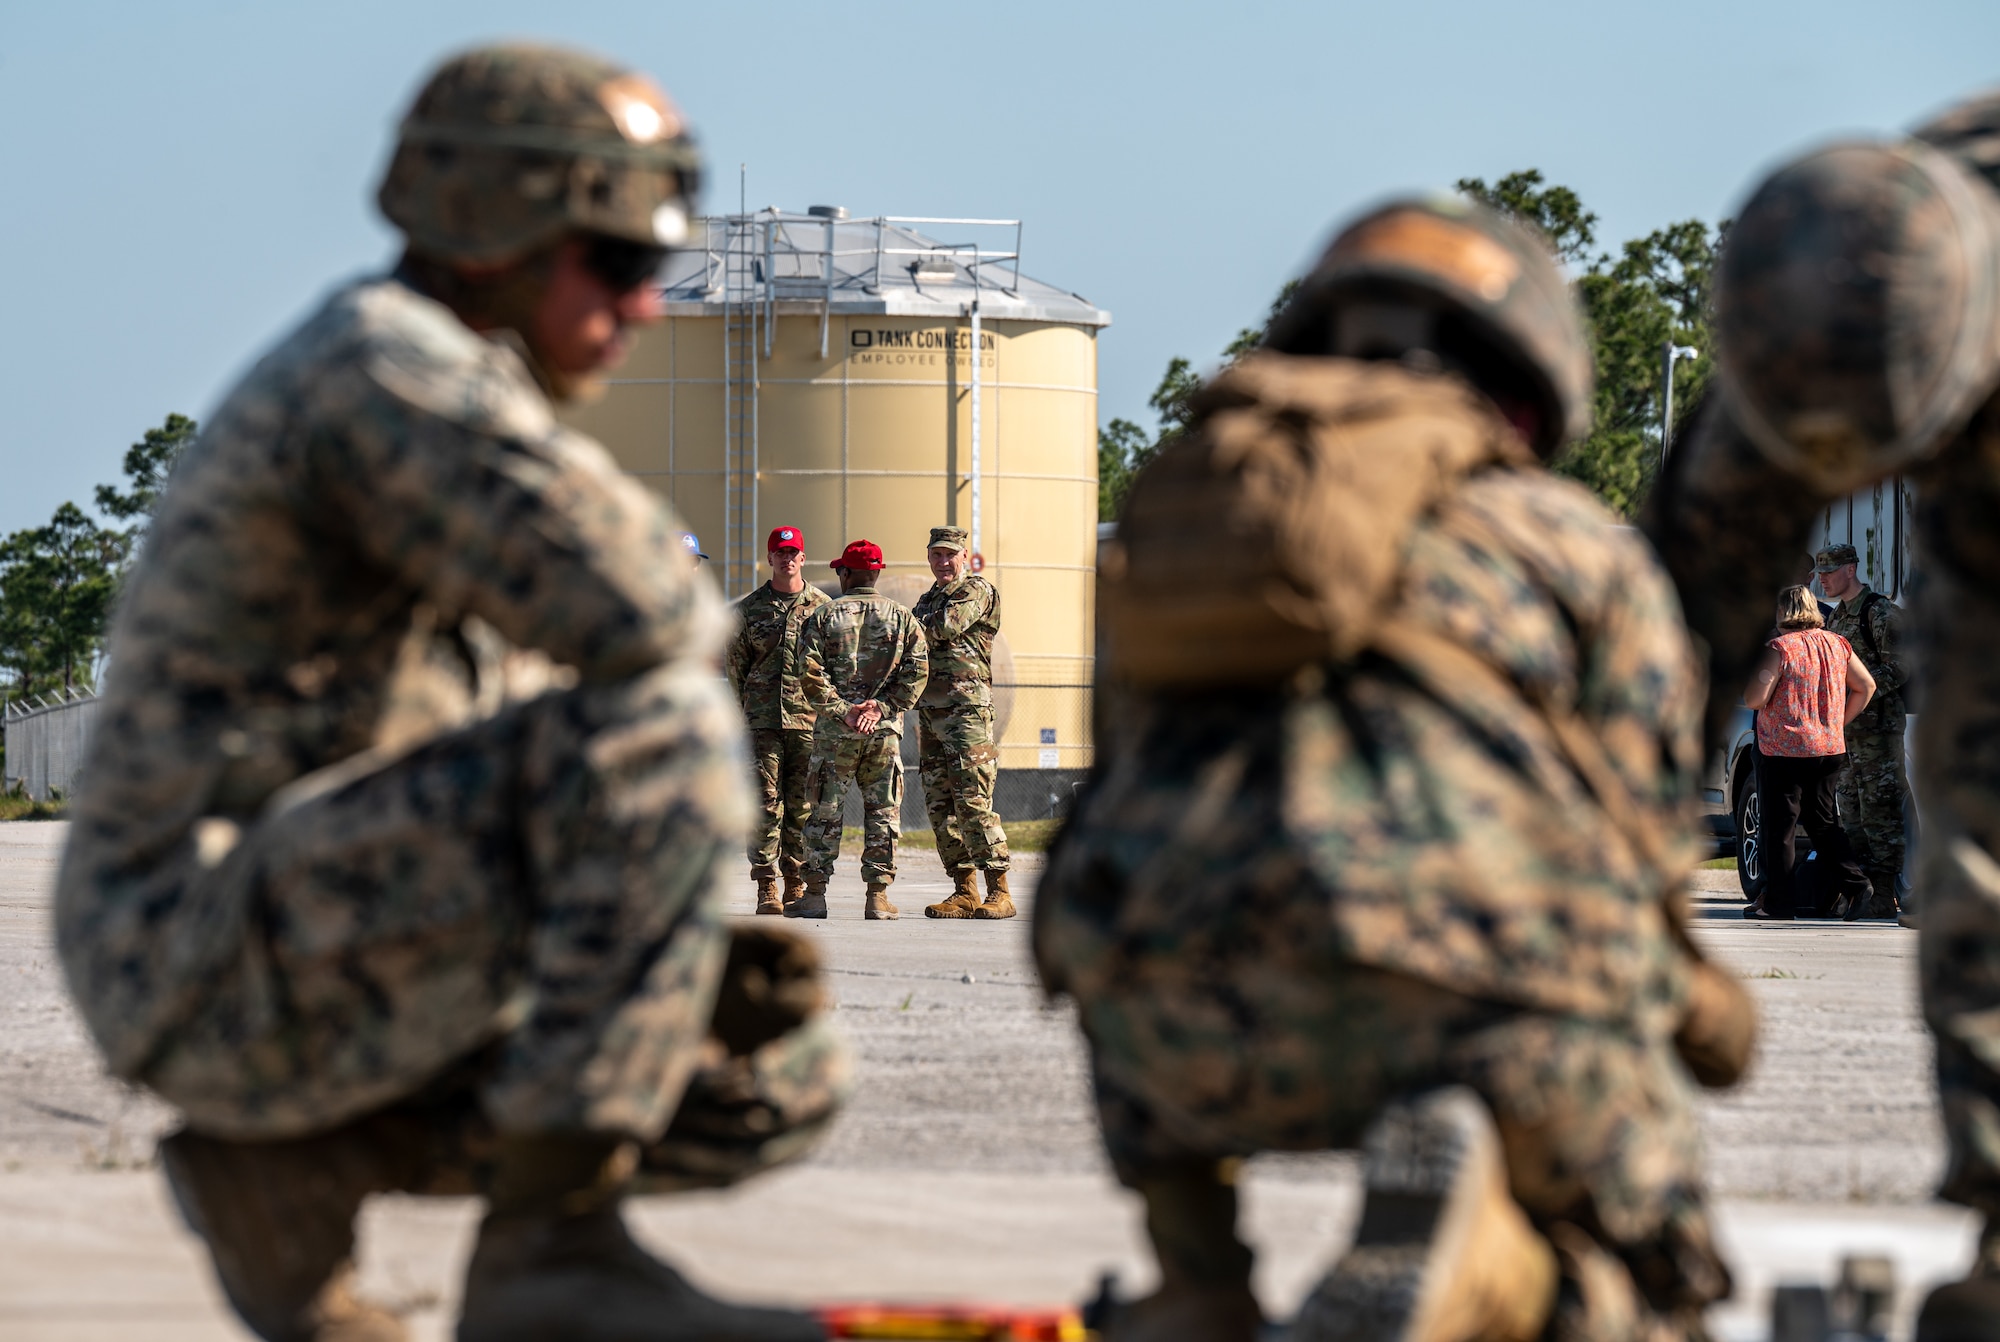 Airmen watch marines during an excercise